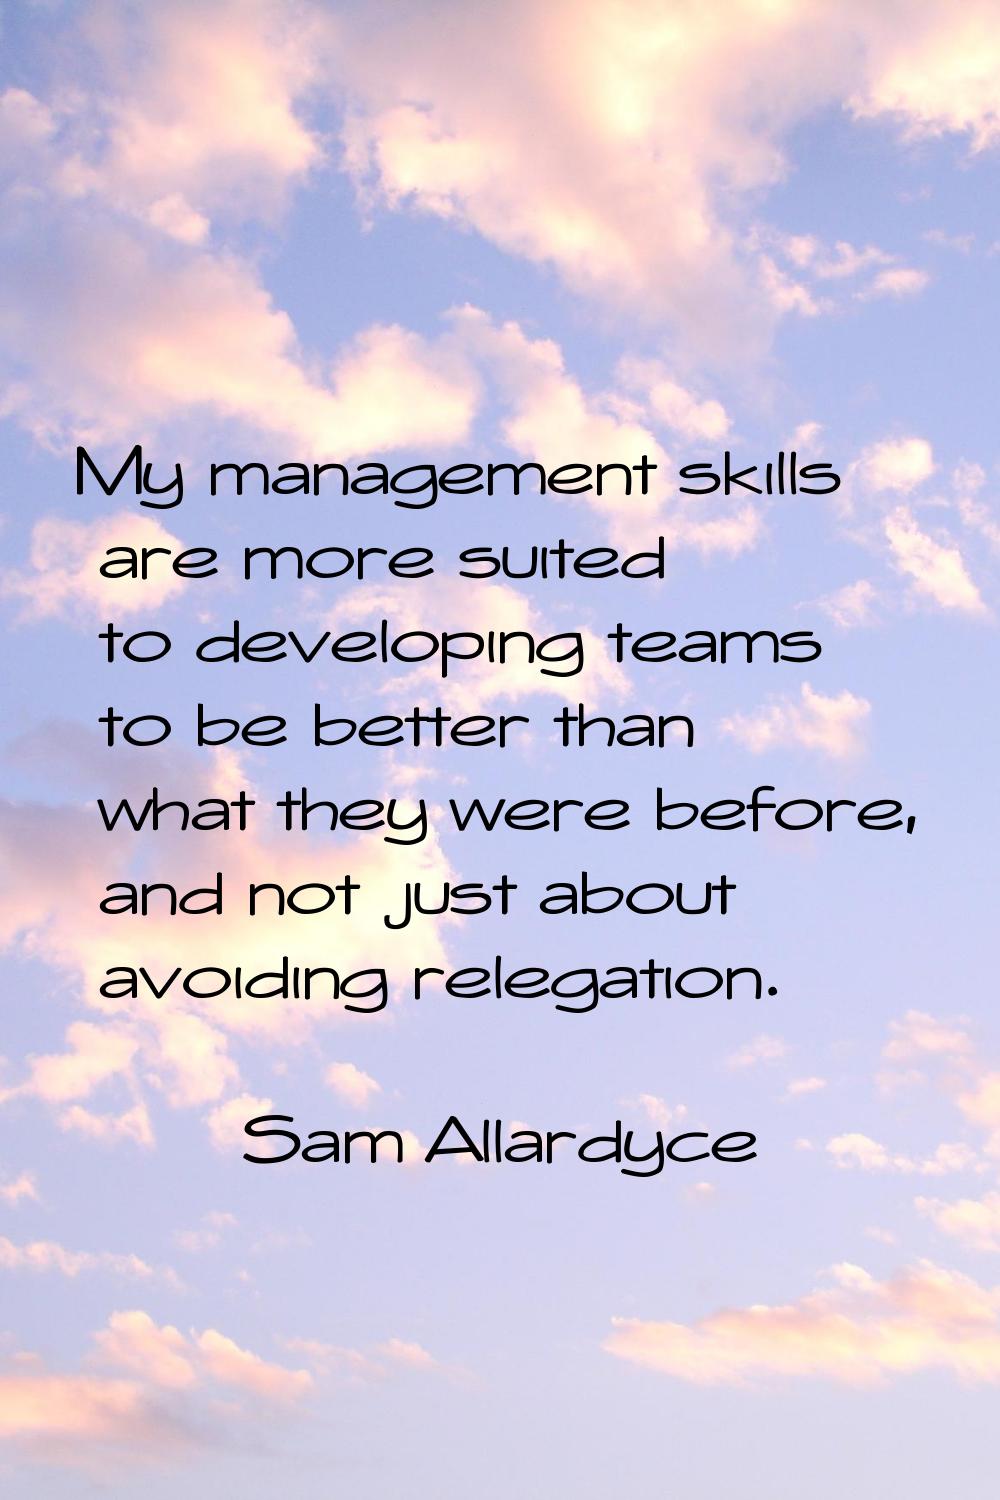 My management skills are more suited to developing teams to be better than what they were before, a